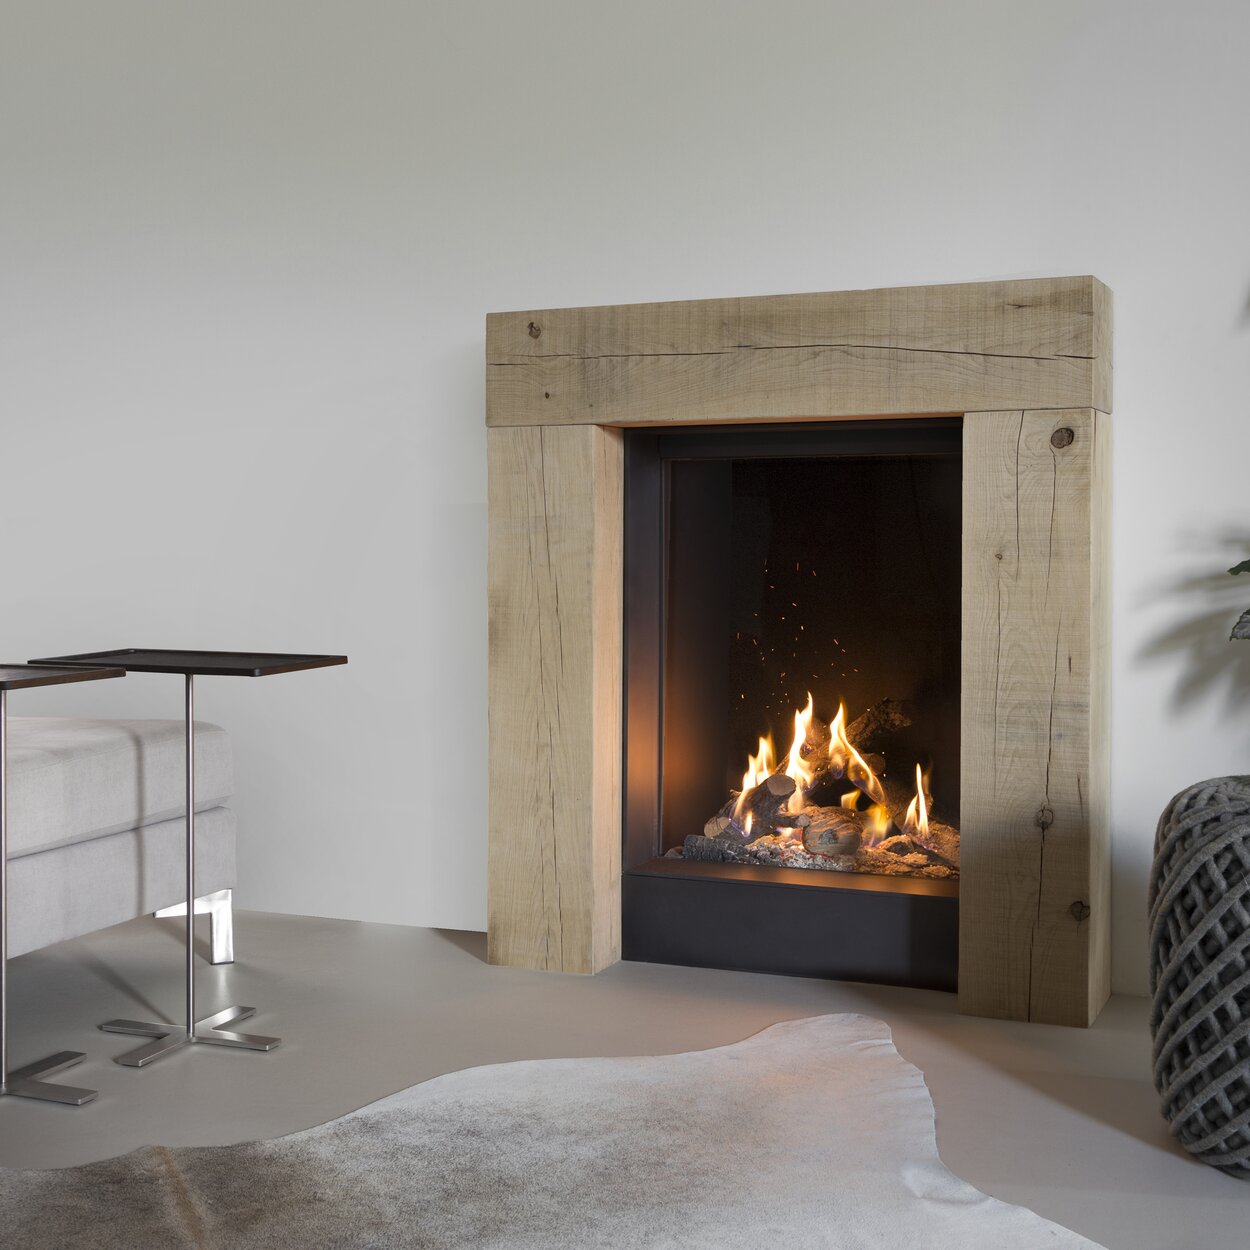 Front version gas fireplace GP60/79F in white wall with wooden frame installed in the living room